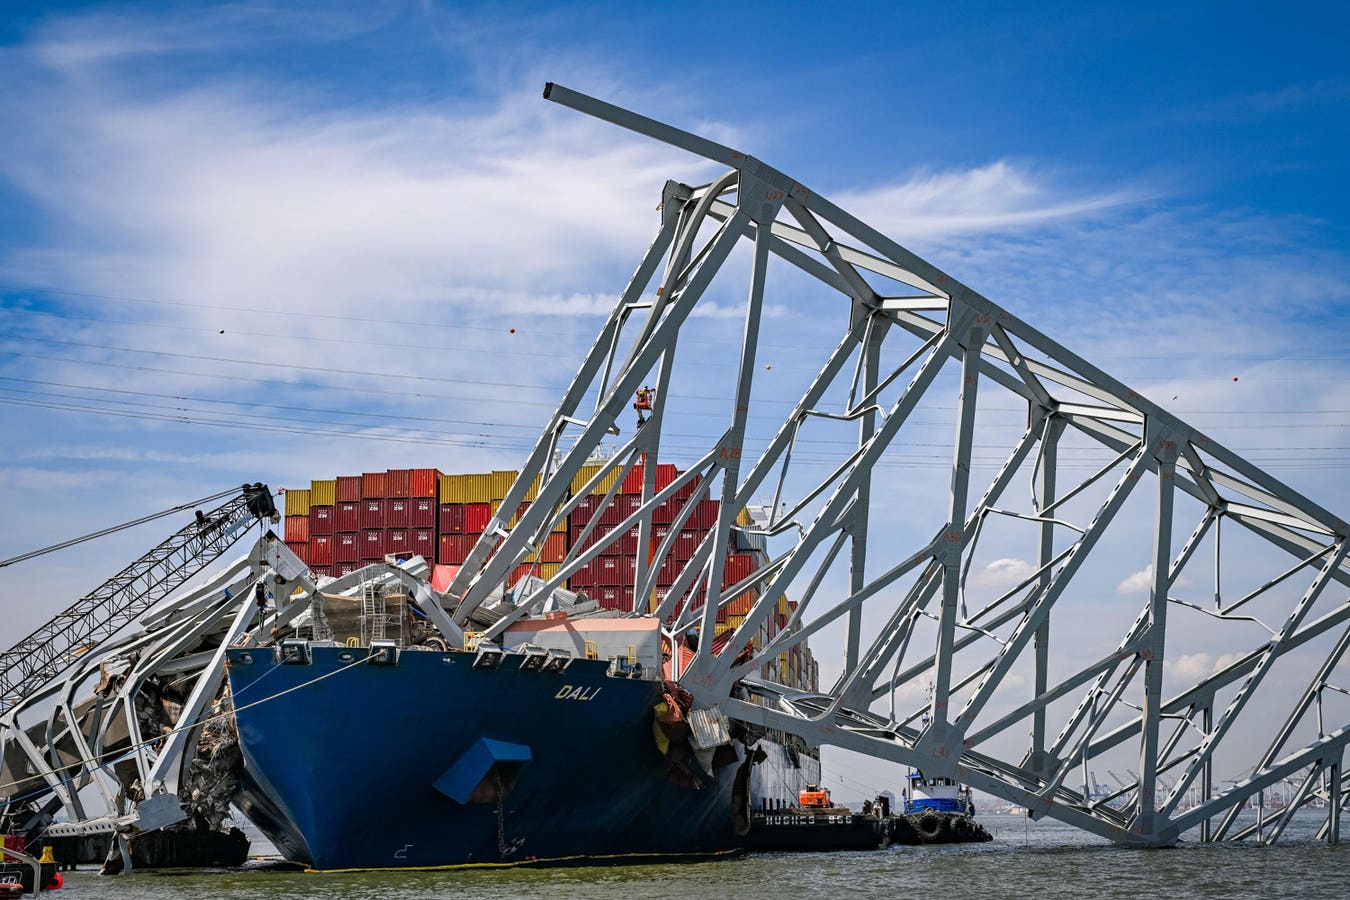 Body Of Sixth Victim In Baltimore Bridge Collapse Recovered